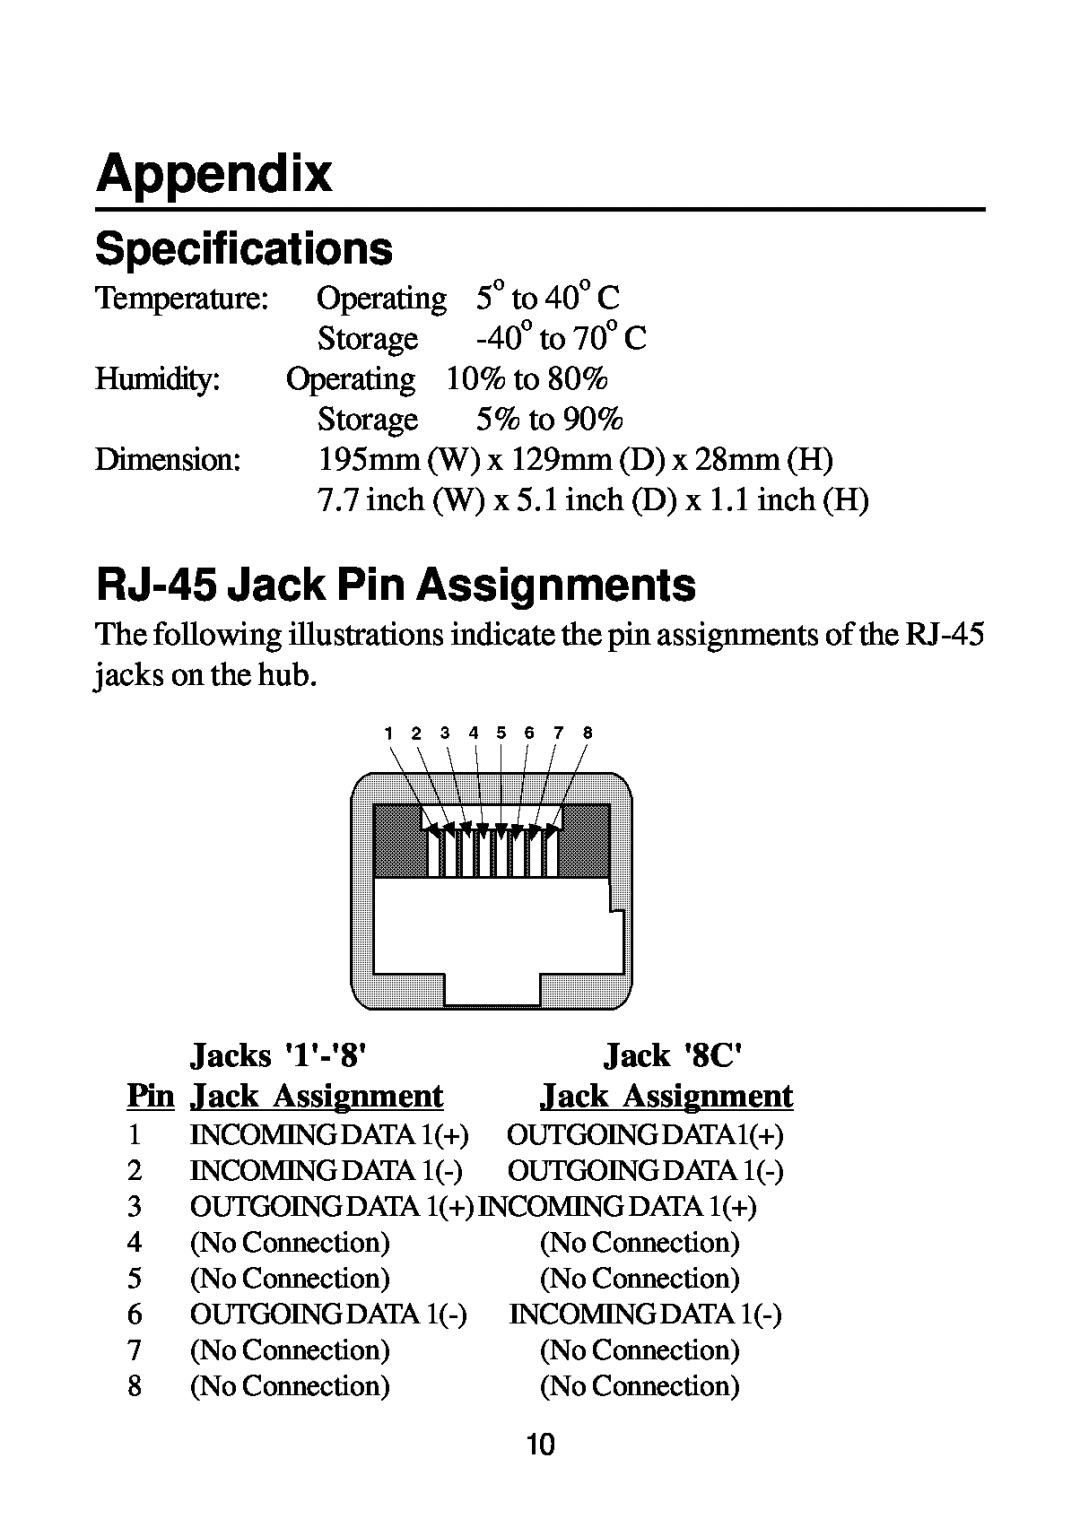 KTI Networks DH-8T manual Appendix, Specifications, RJ-45 Jack Pin Assignments, Jacks, Jack 8C, Pin Jack Assignment 